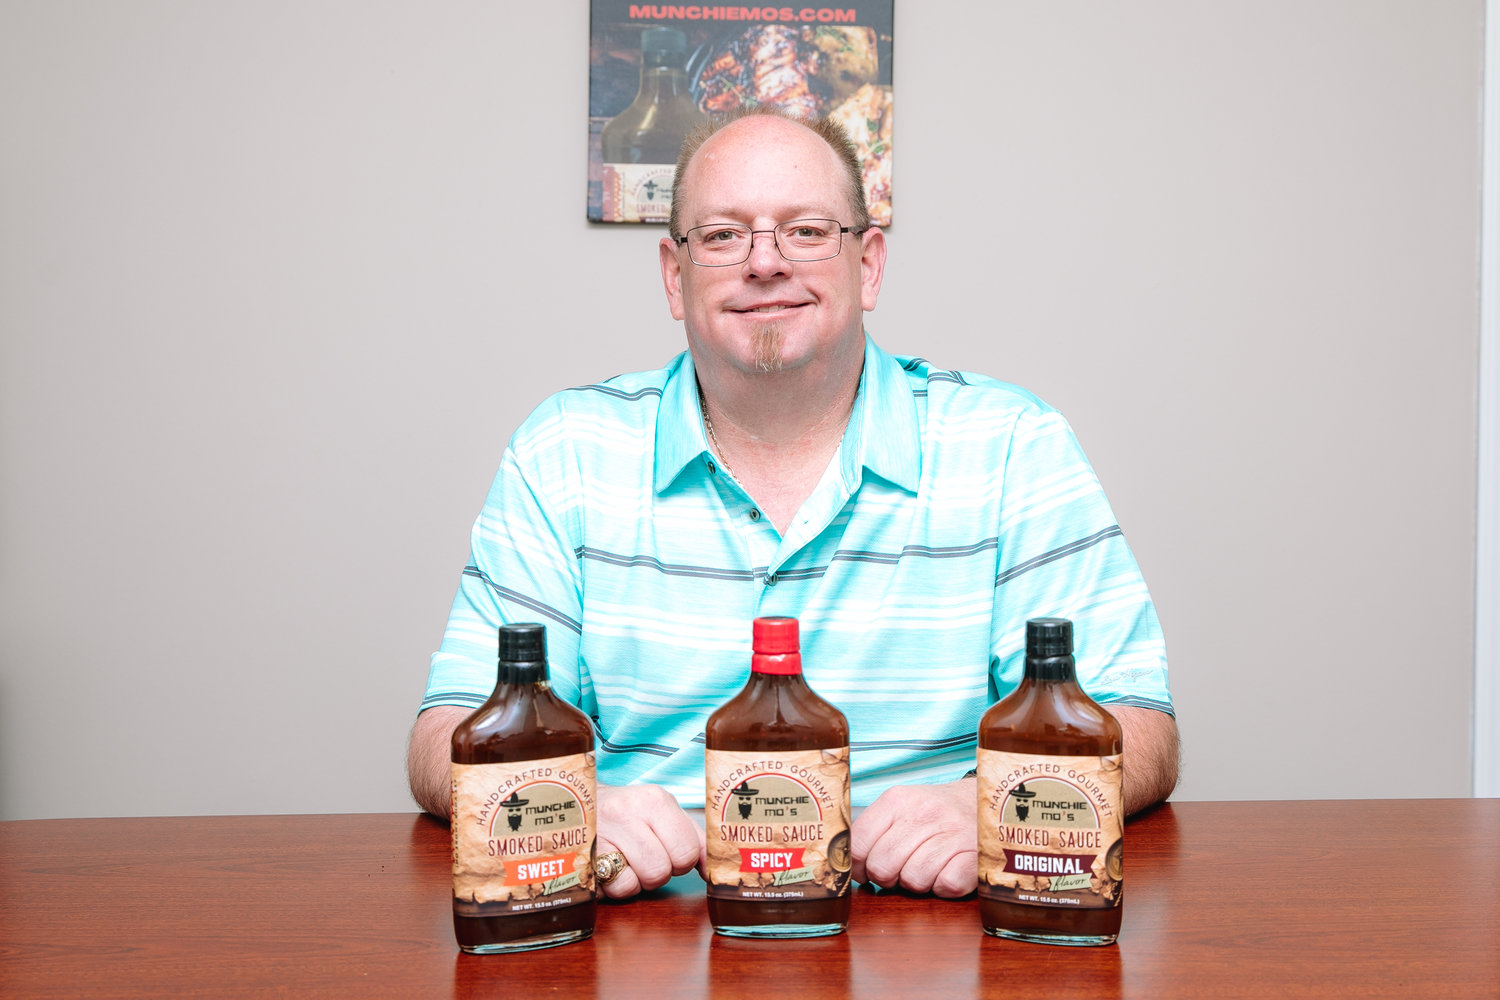 Co-owner Don Helms says the company plans to add a steak sauce and salsas next year.